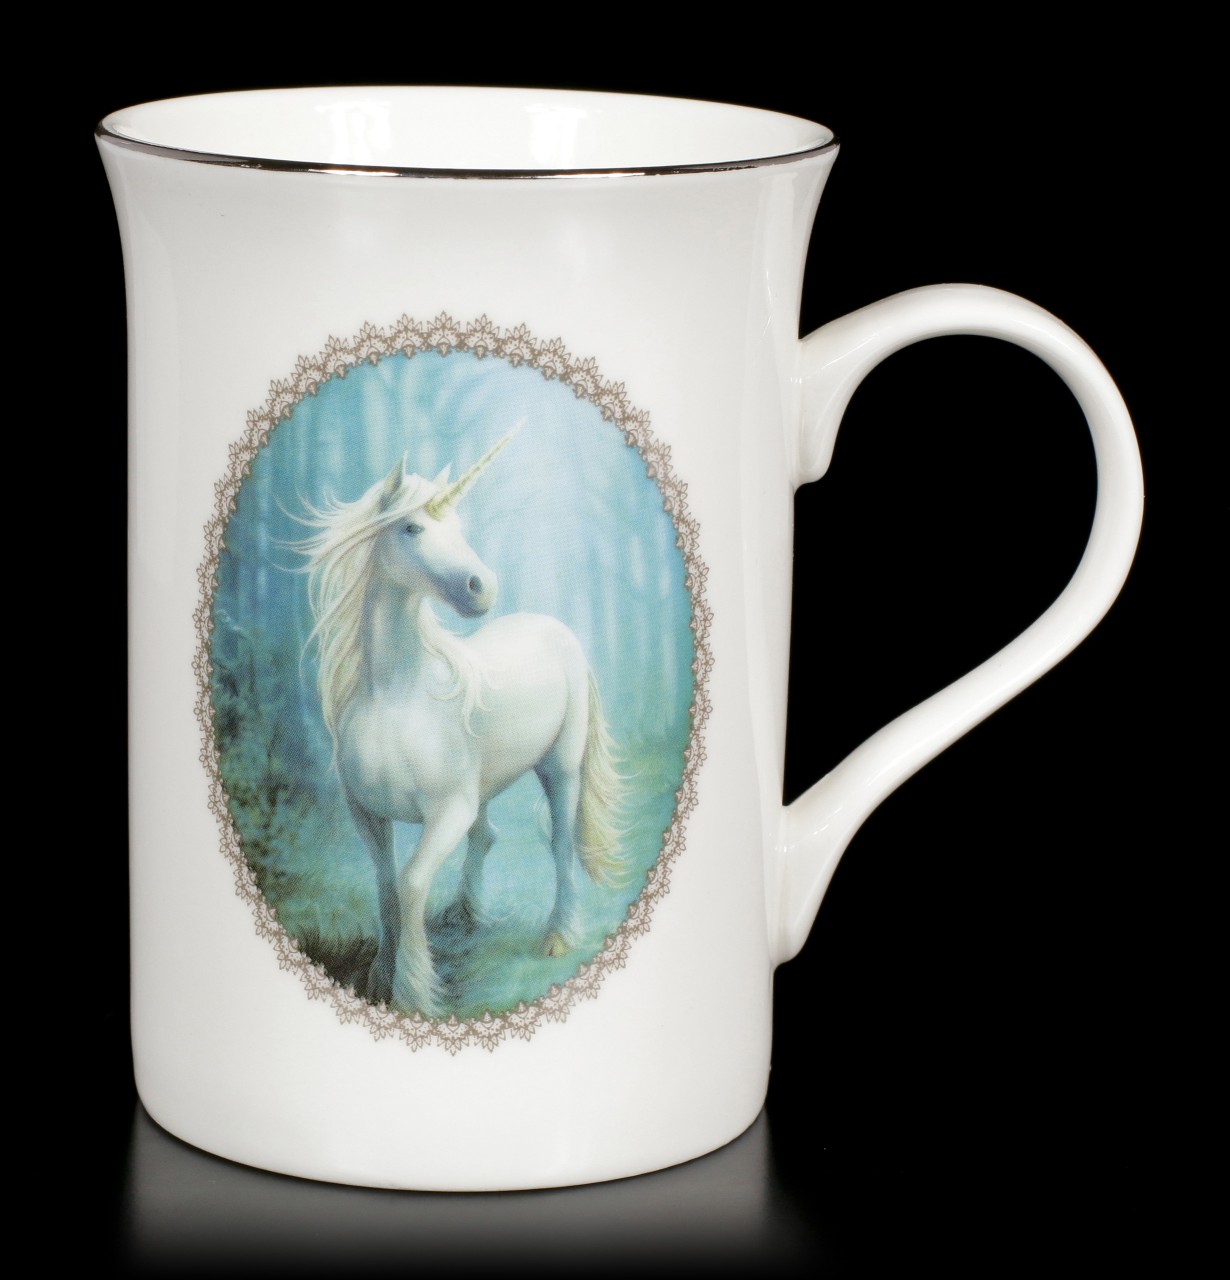 Mug with Unicorn - Forest Unicorn by Anne Stokes